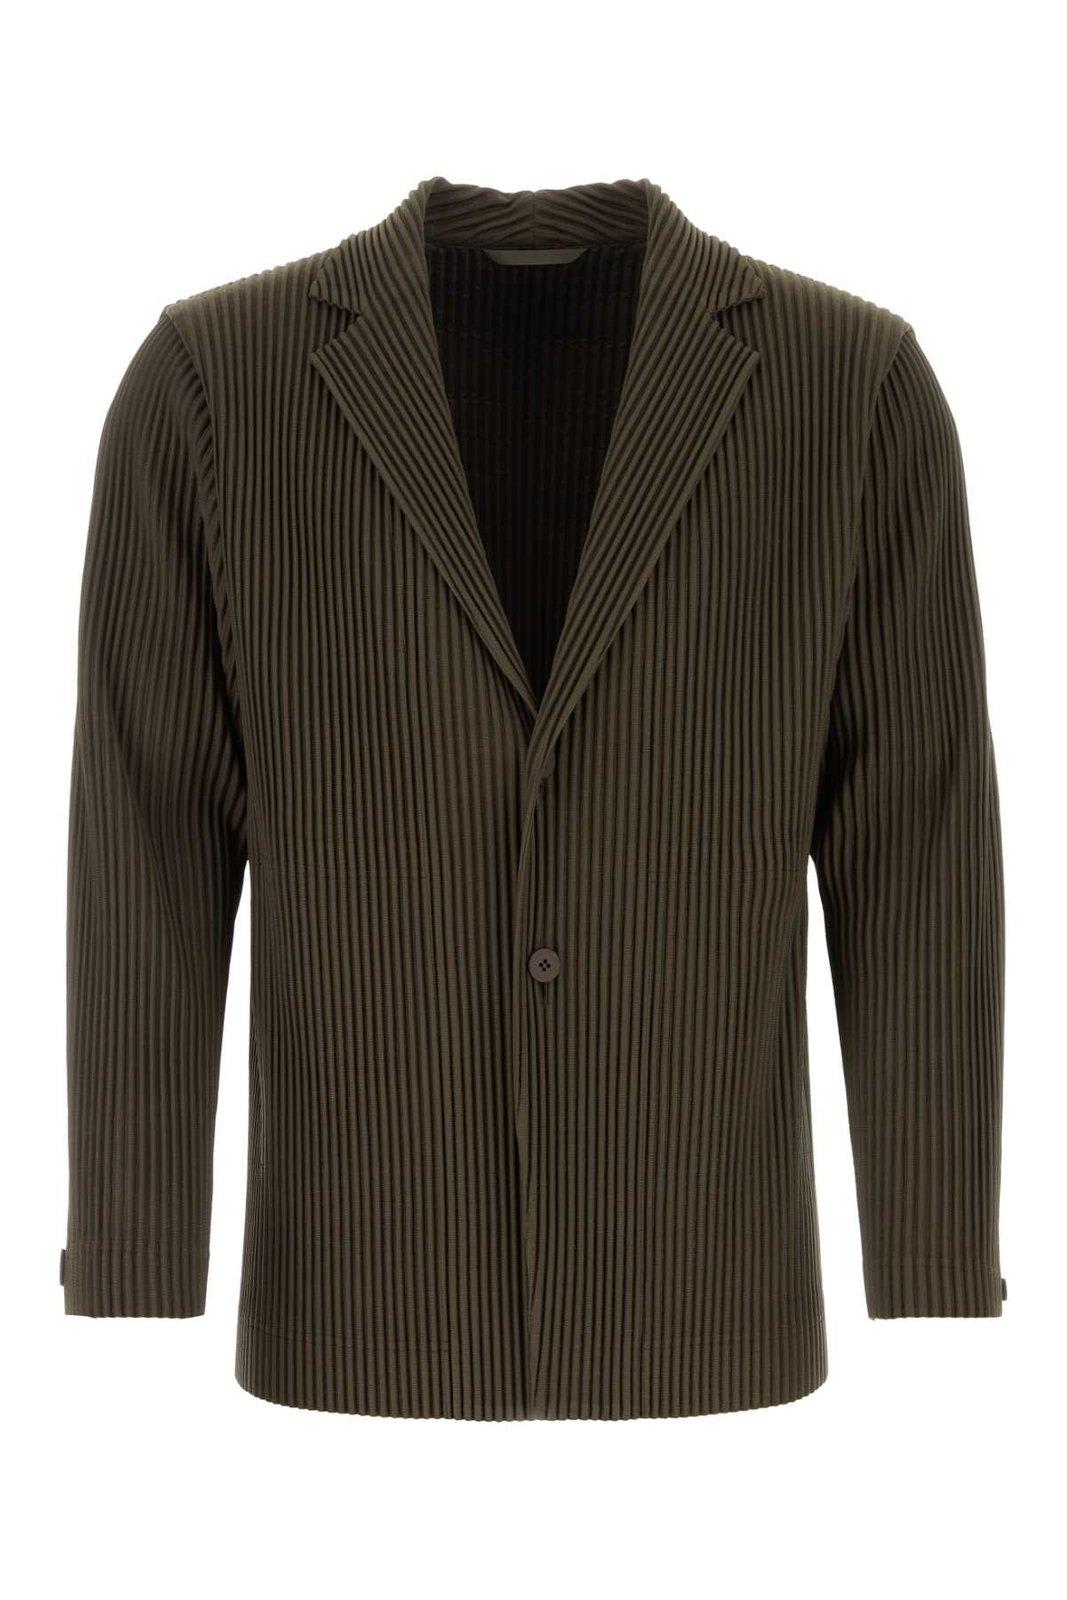 Homme Plissé Issey Miyake Single Breasted Tailored Pleats Jacket